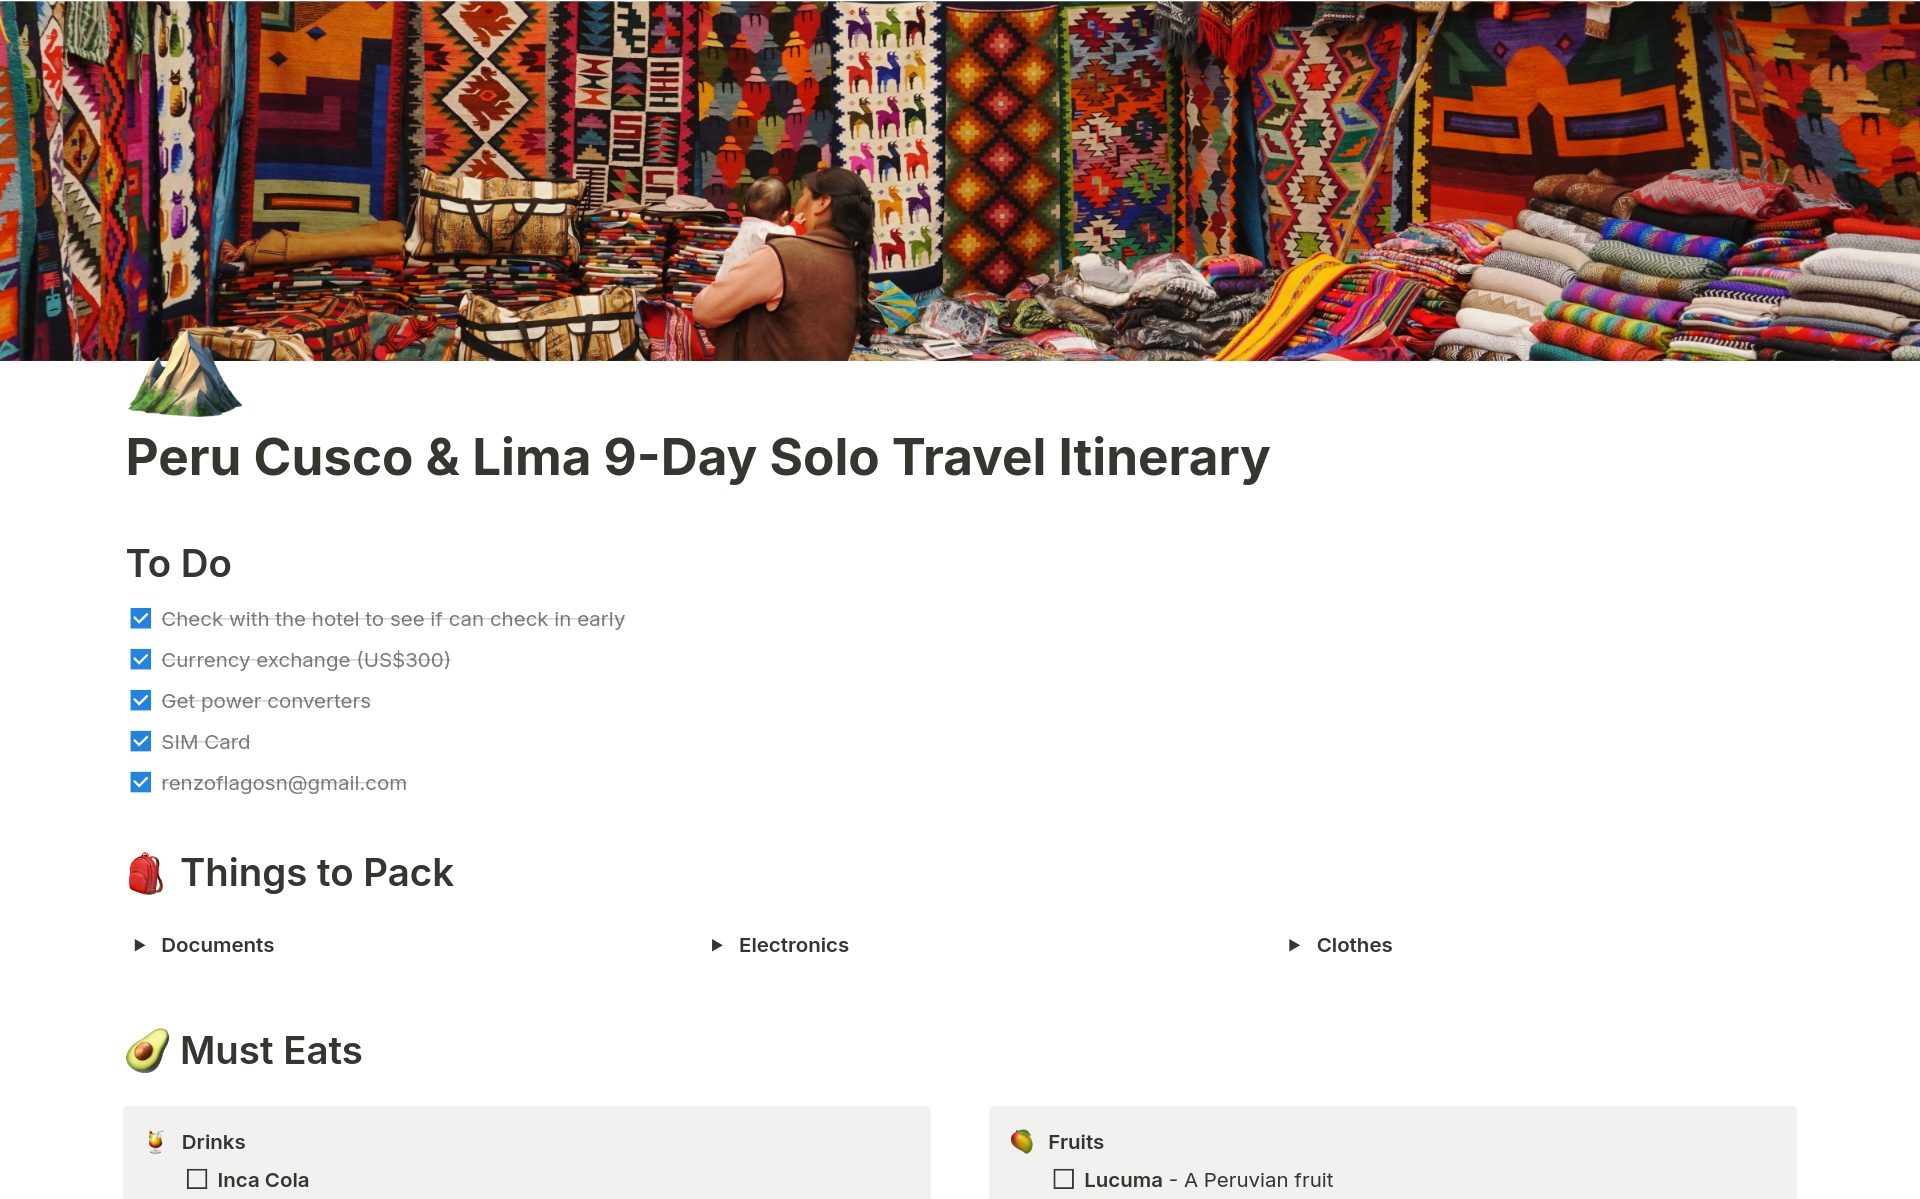 A template preview for Peru Cusco & Lima 9-Day Solo Travel Itinerary